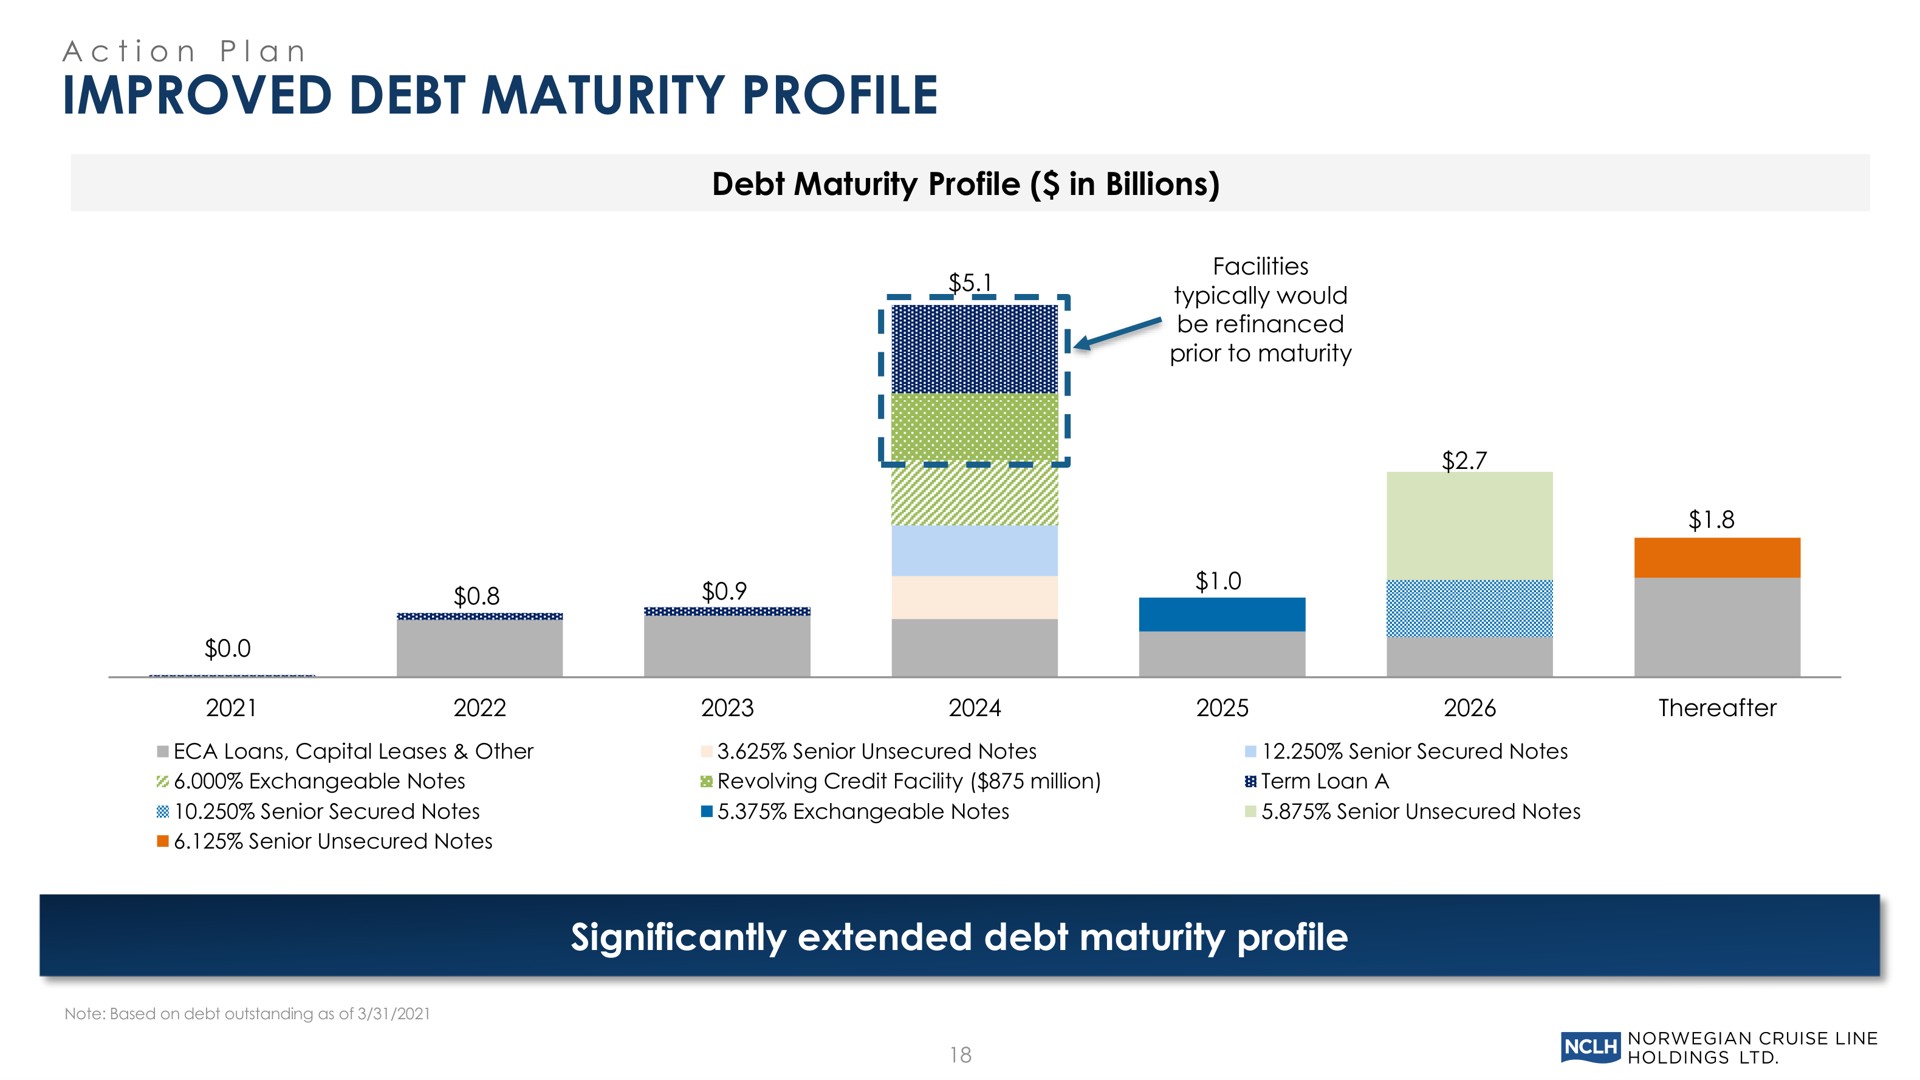 improved debt maturity profile significantly extended debt maturity profile same | Norwegian Cruise Line